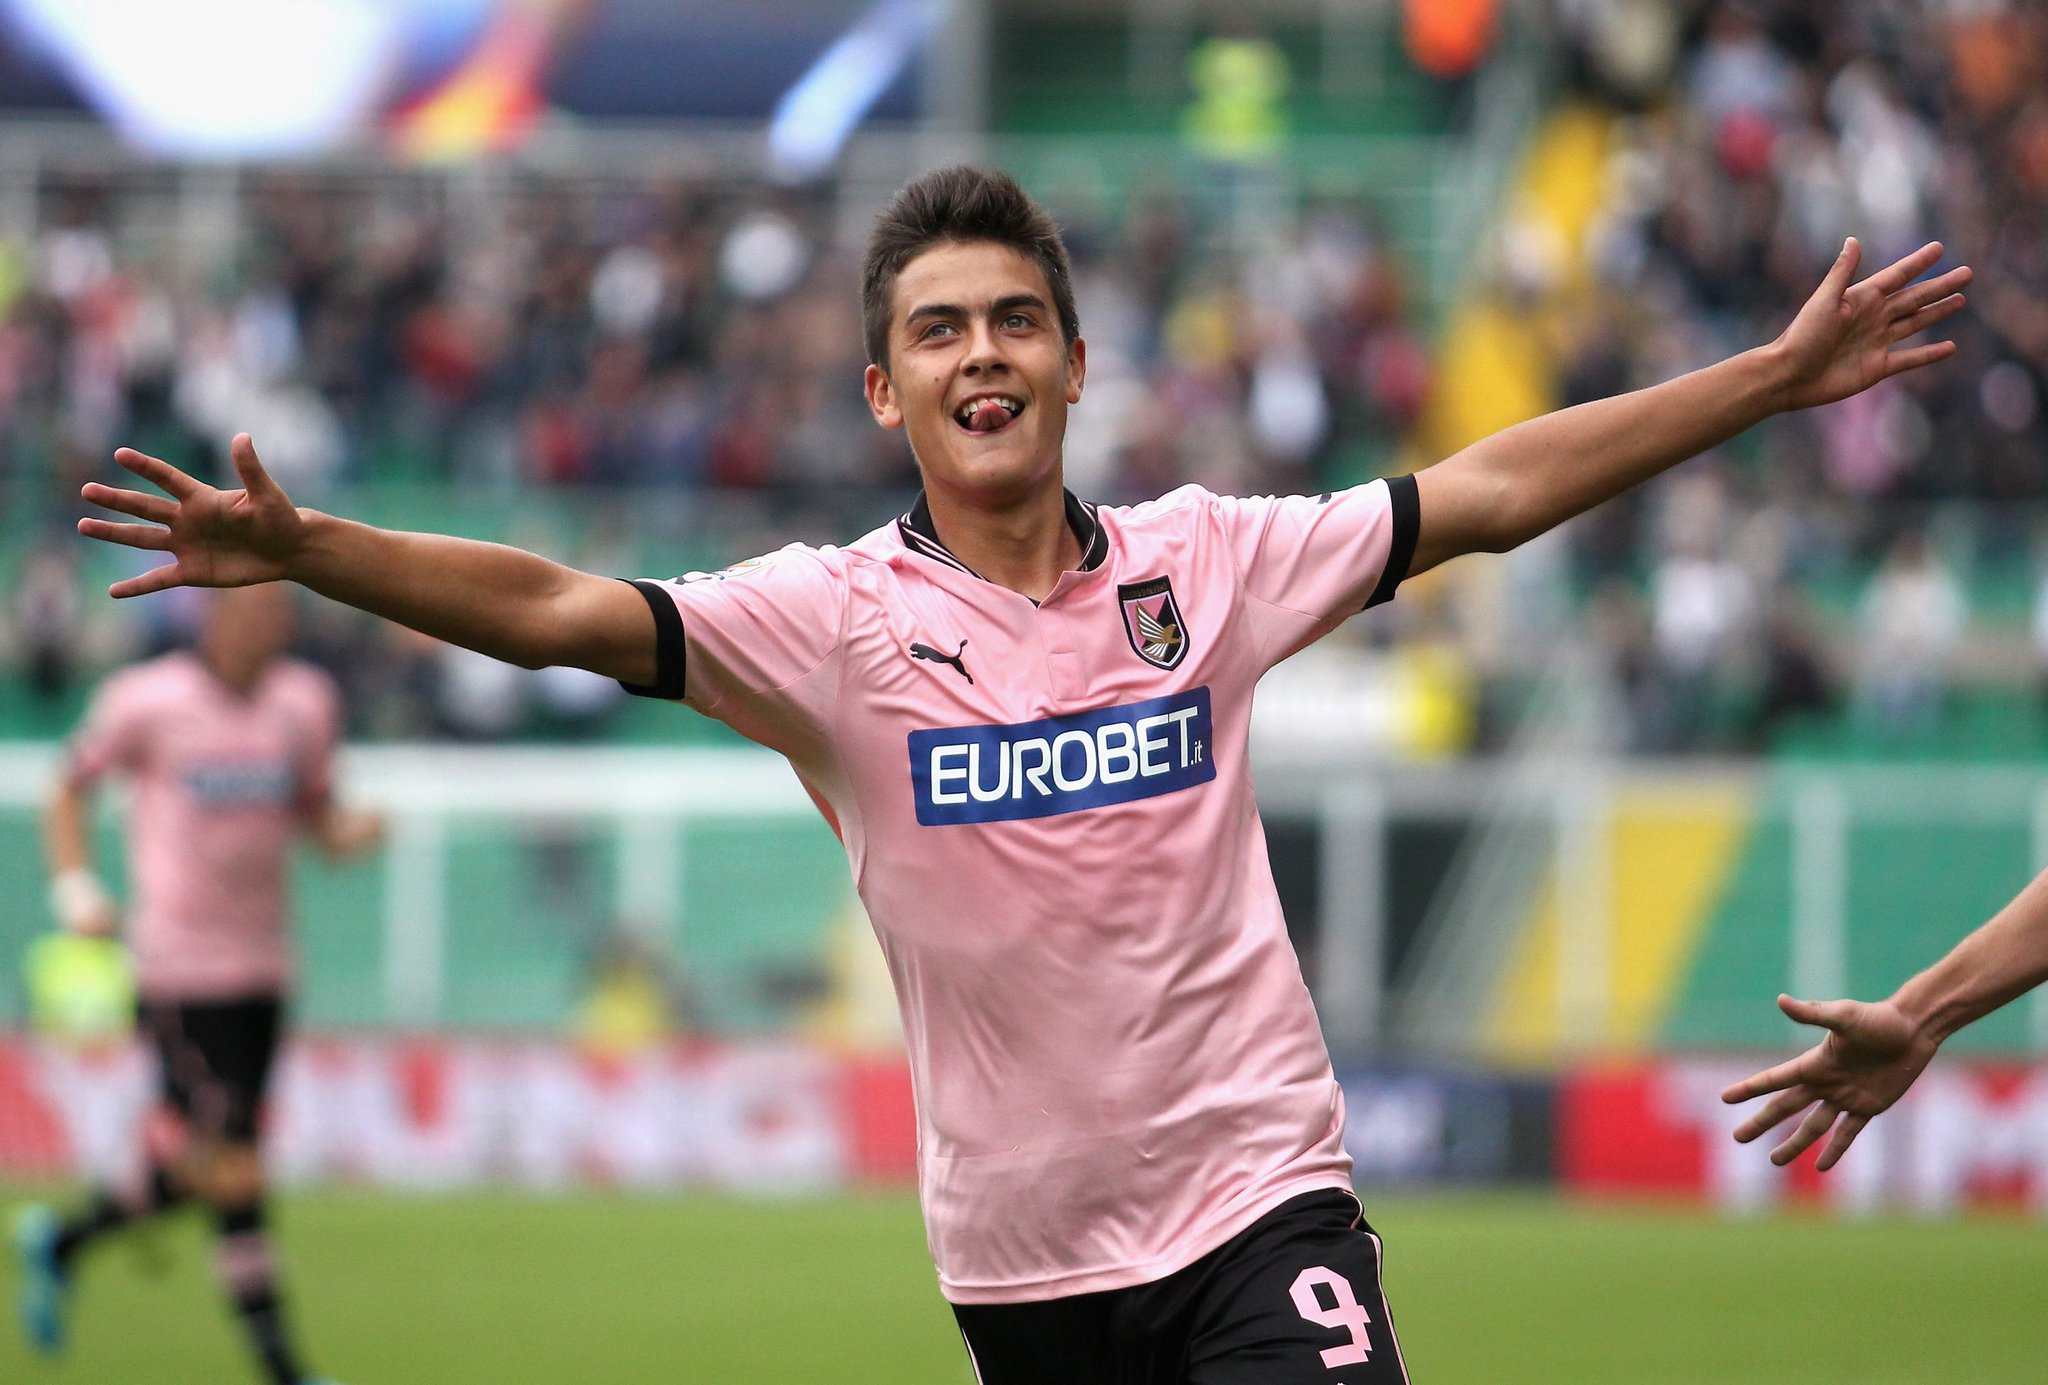 US Palermo (Home 2012/13)